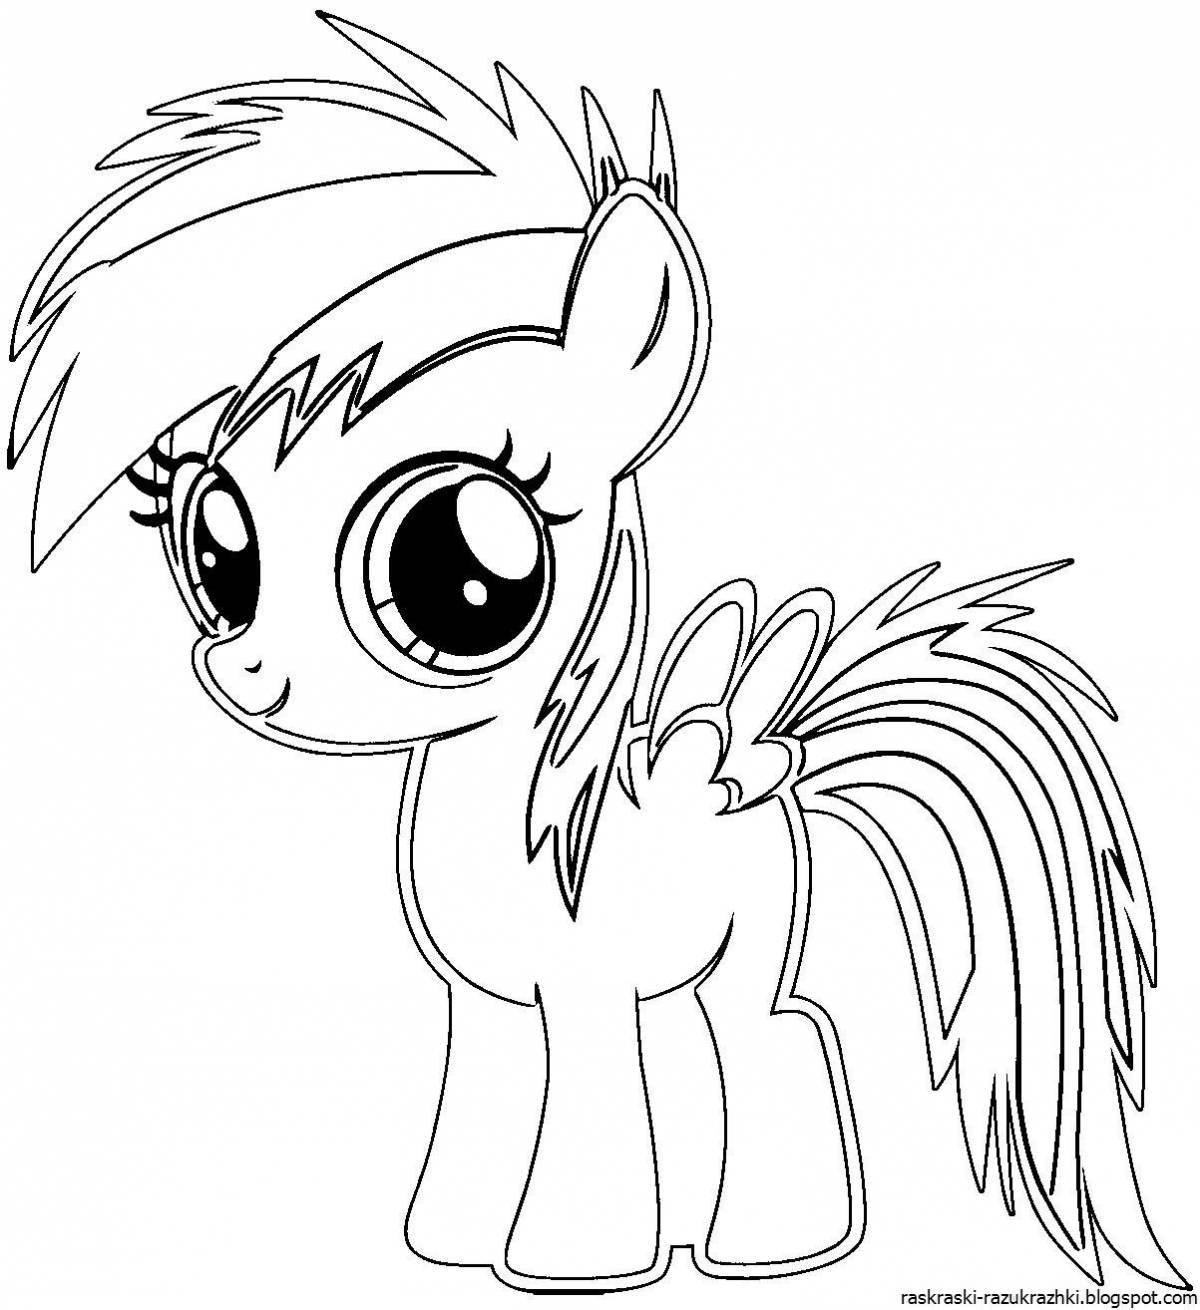 Rainbow dash live coloring page